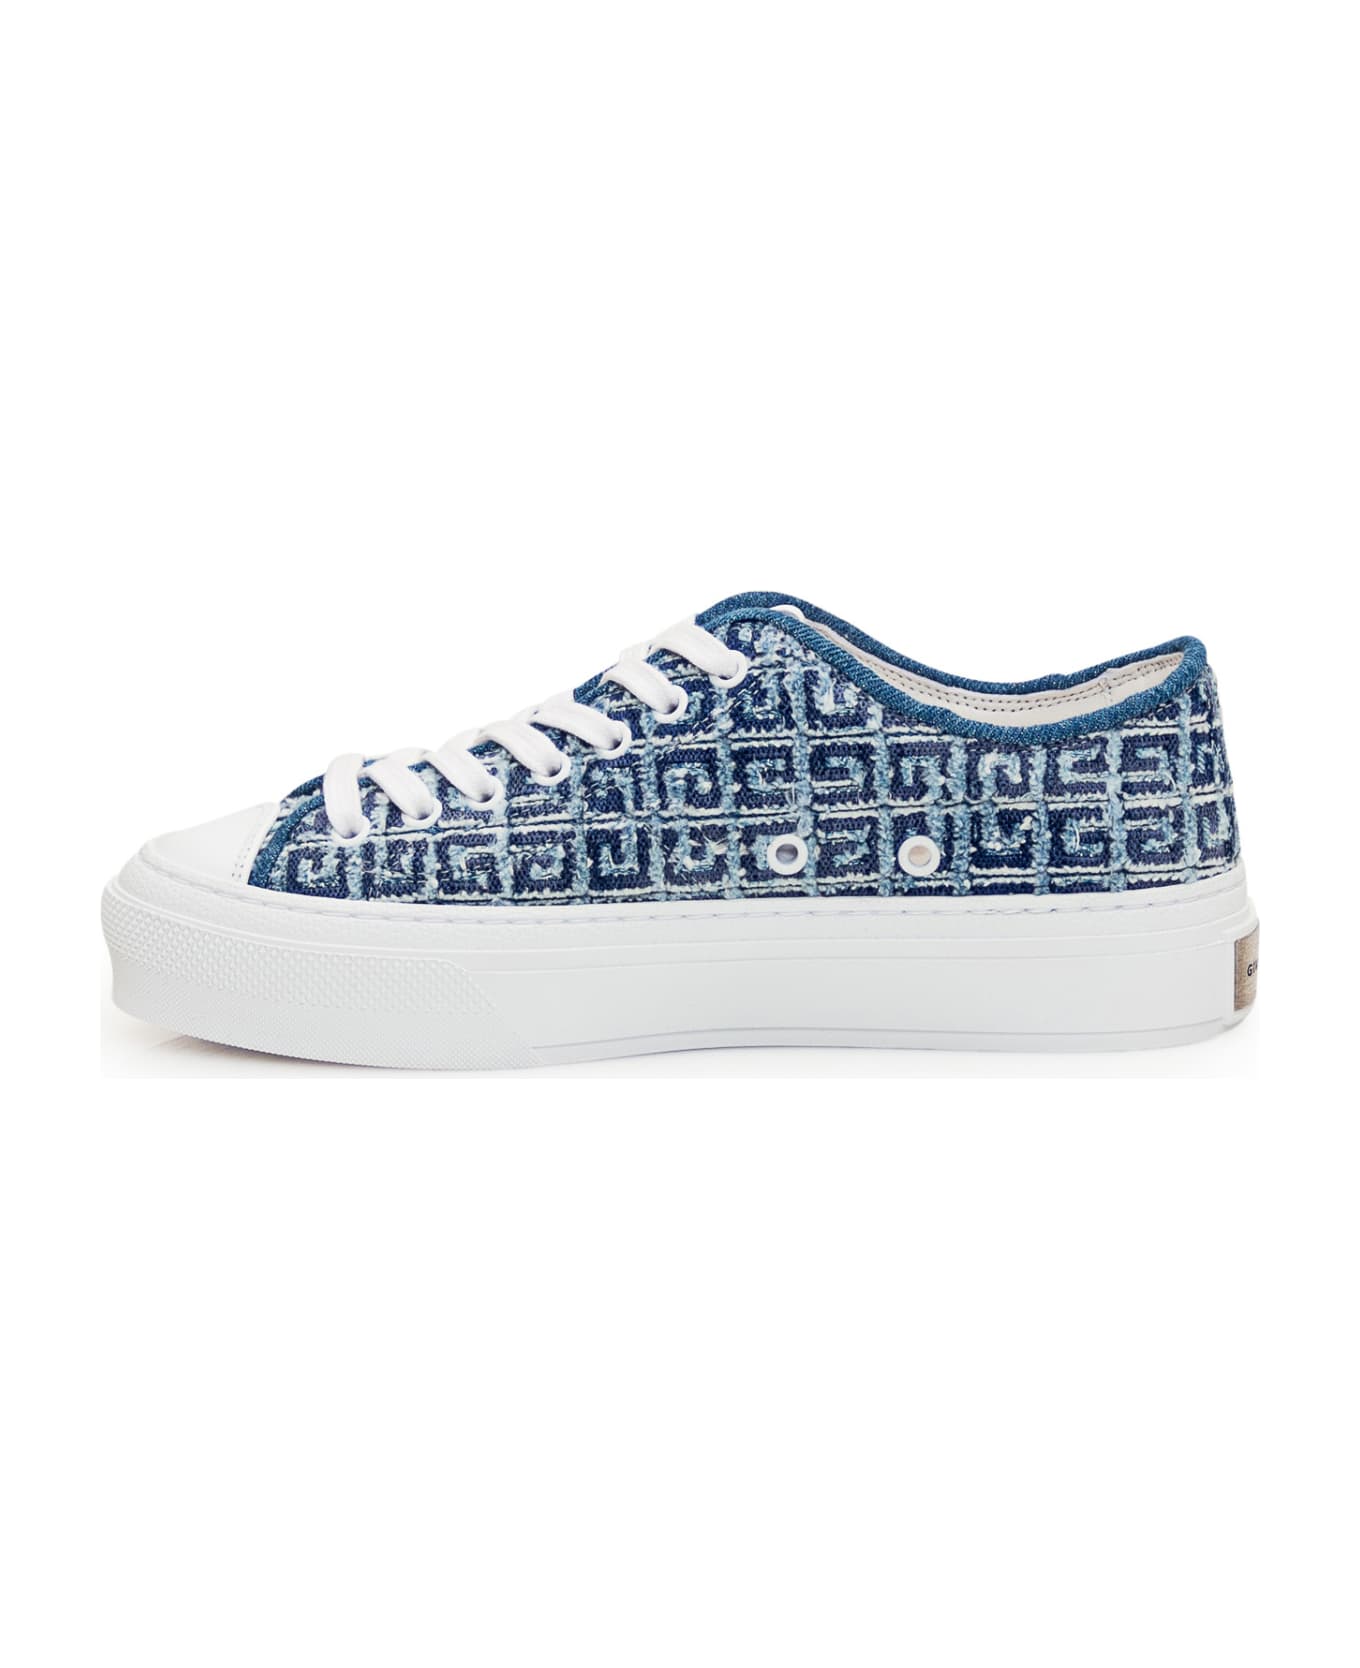 Givenchy City Low Sneakers - MEDIUM BLUE